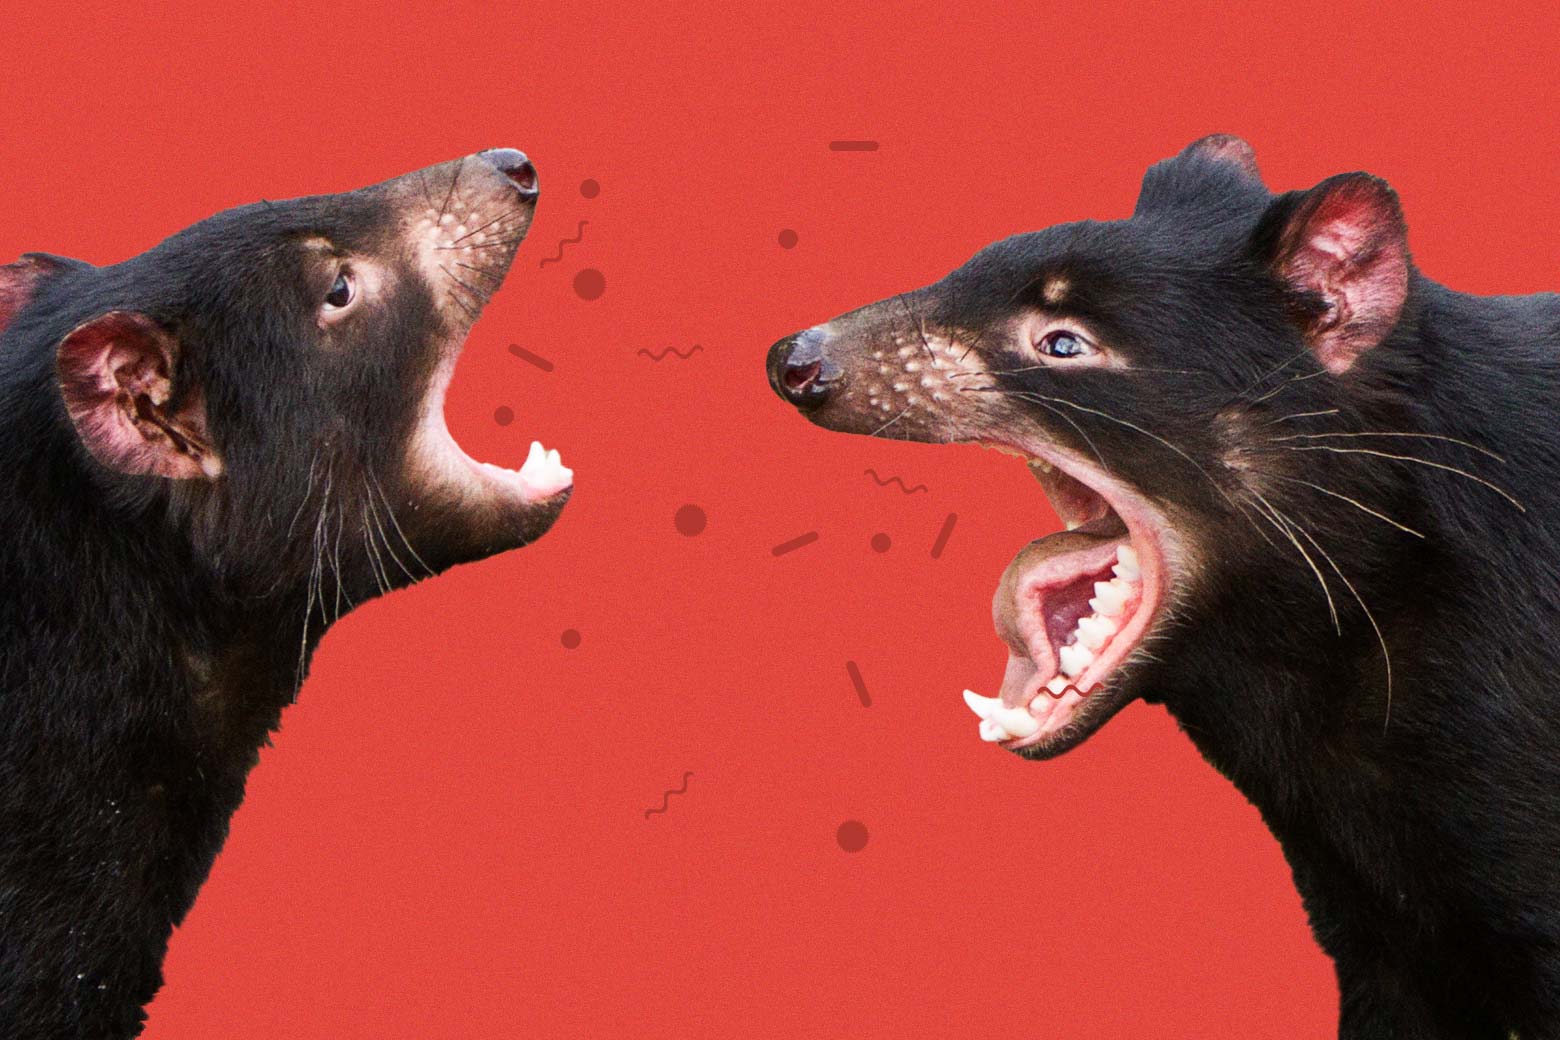 Two Tasmanian devils are seen screaming at each other against a red background, with a group of cells floating between their mouths.